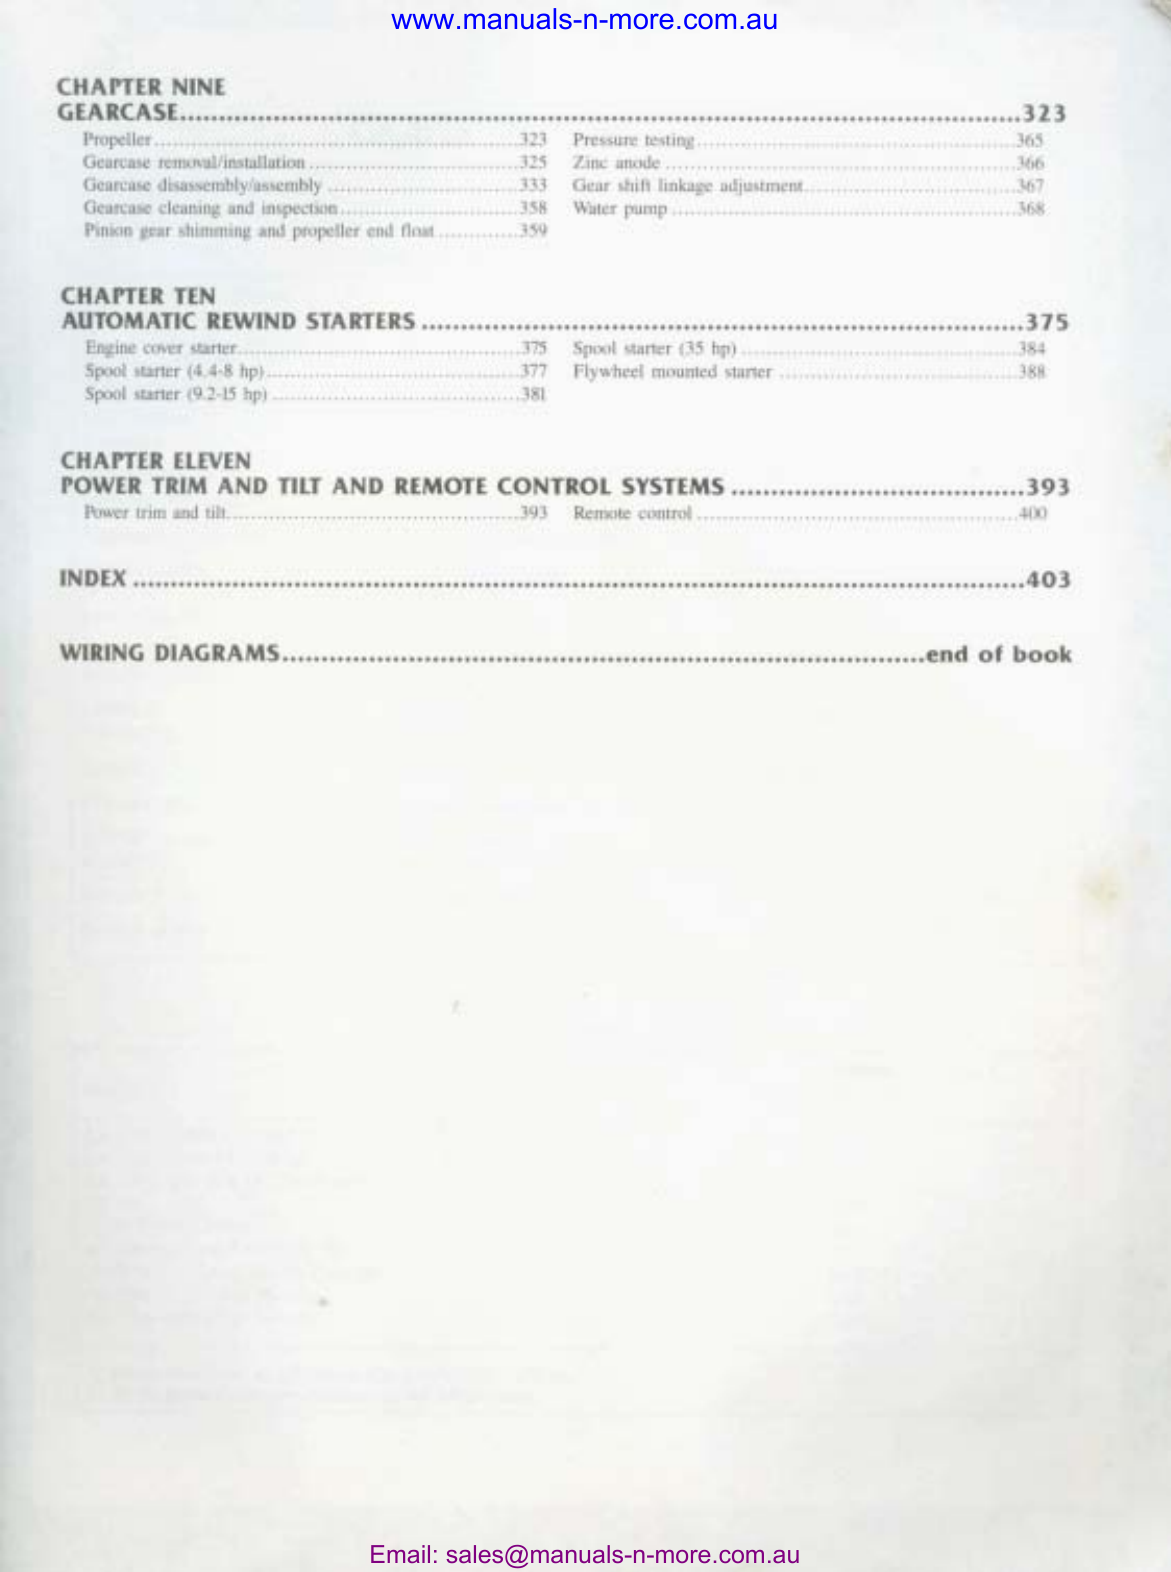 1966-1984 Chrysler 3.5 hp - 140 hp outboard motor service manual Preview image 4